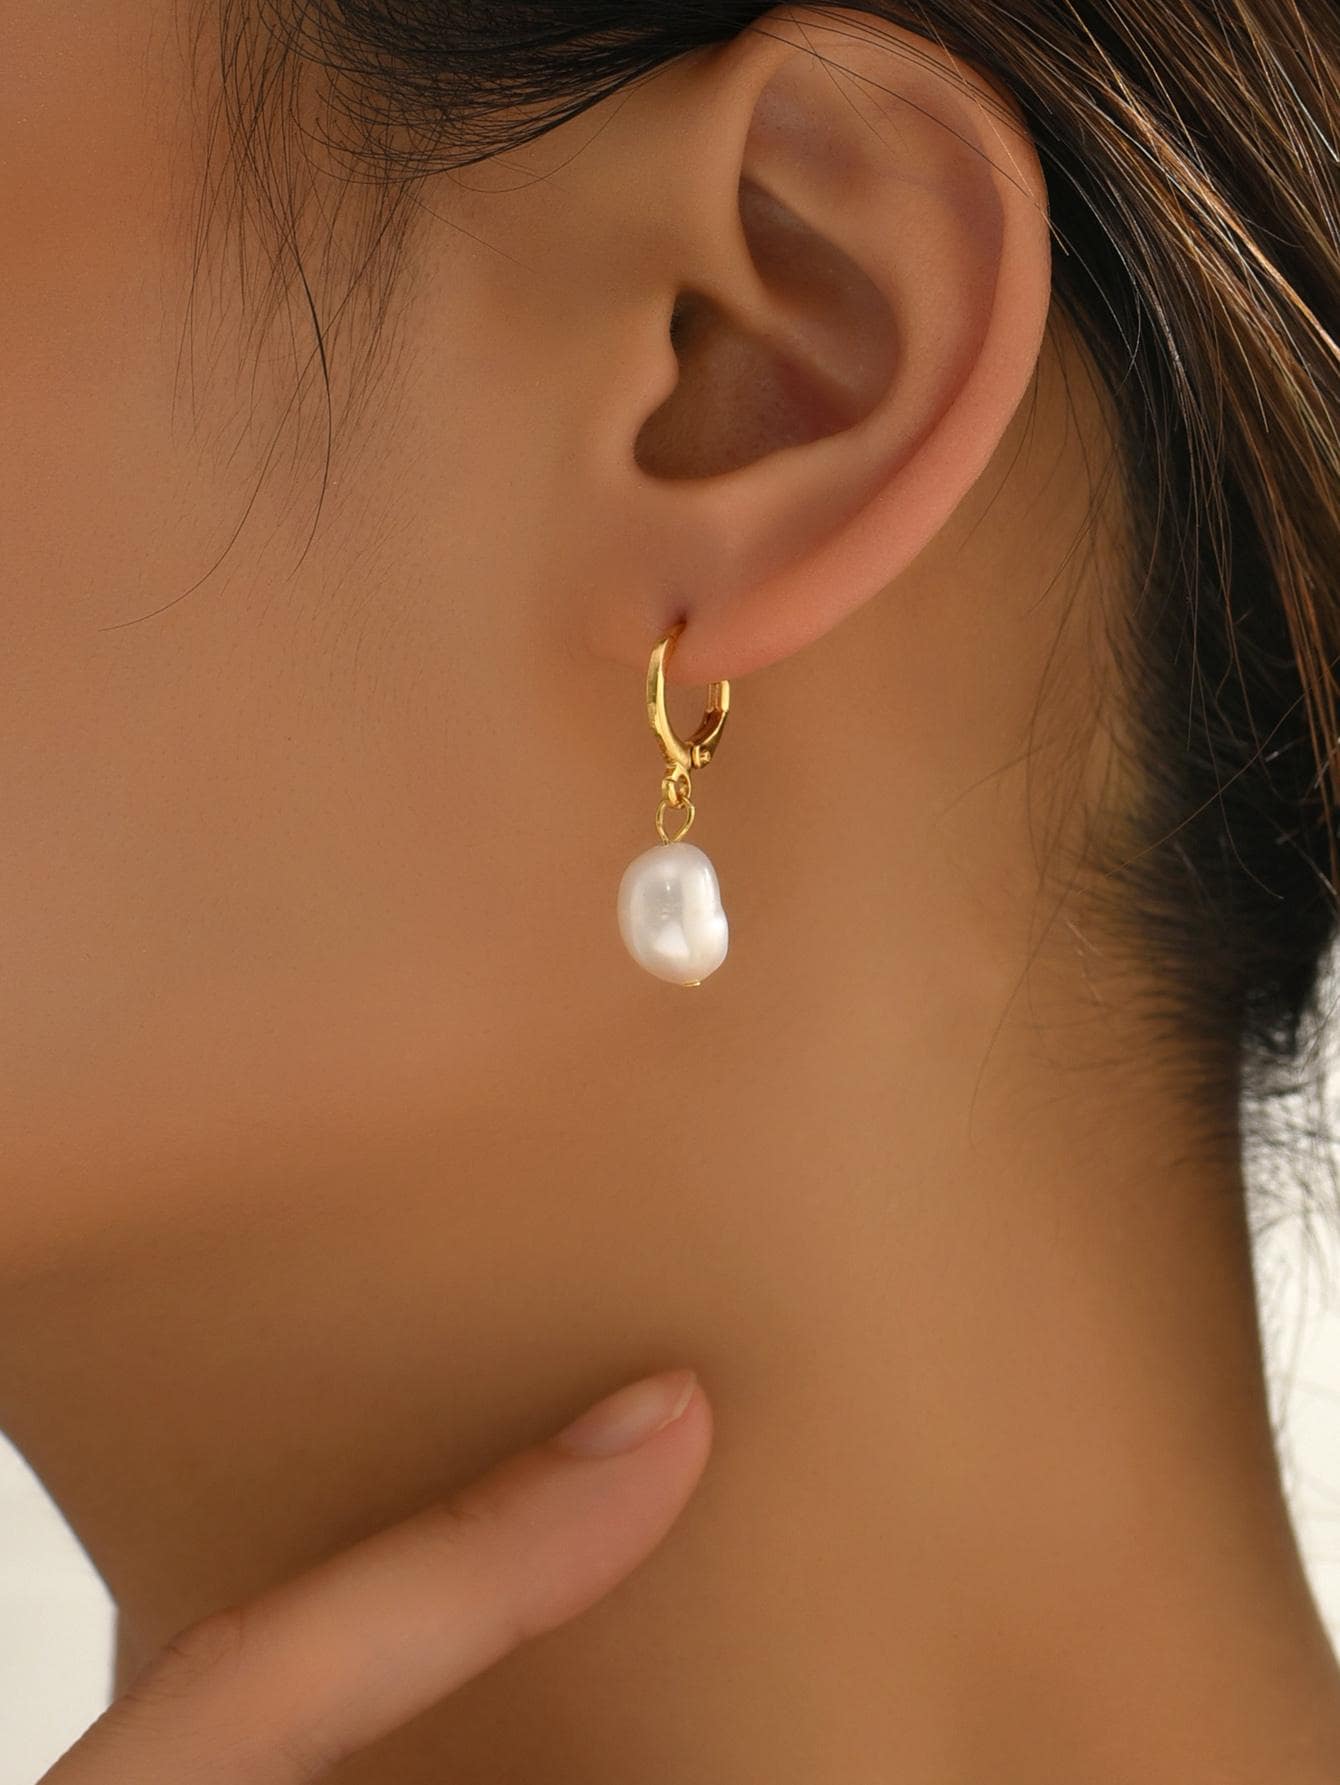 1pair Elegant Faux Pearl Drop Earrings For Women For Party Copper Jewelry